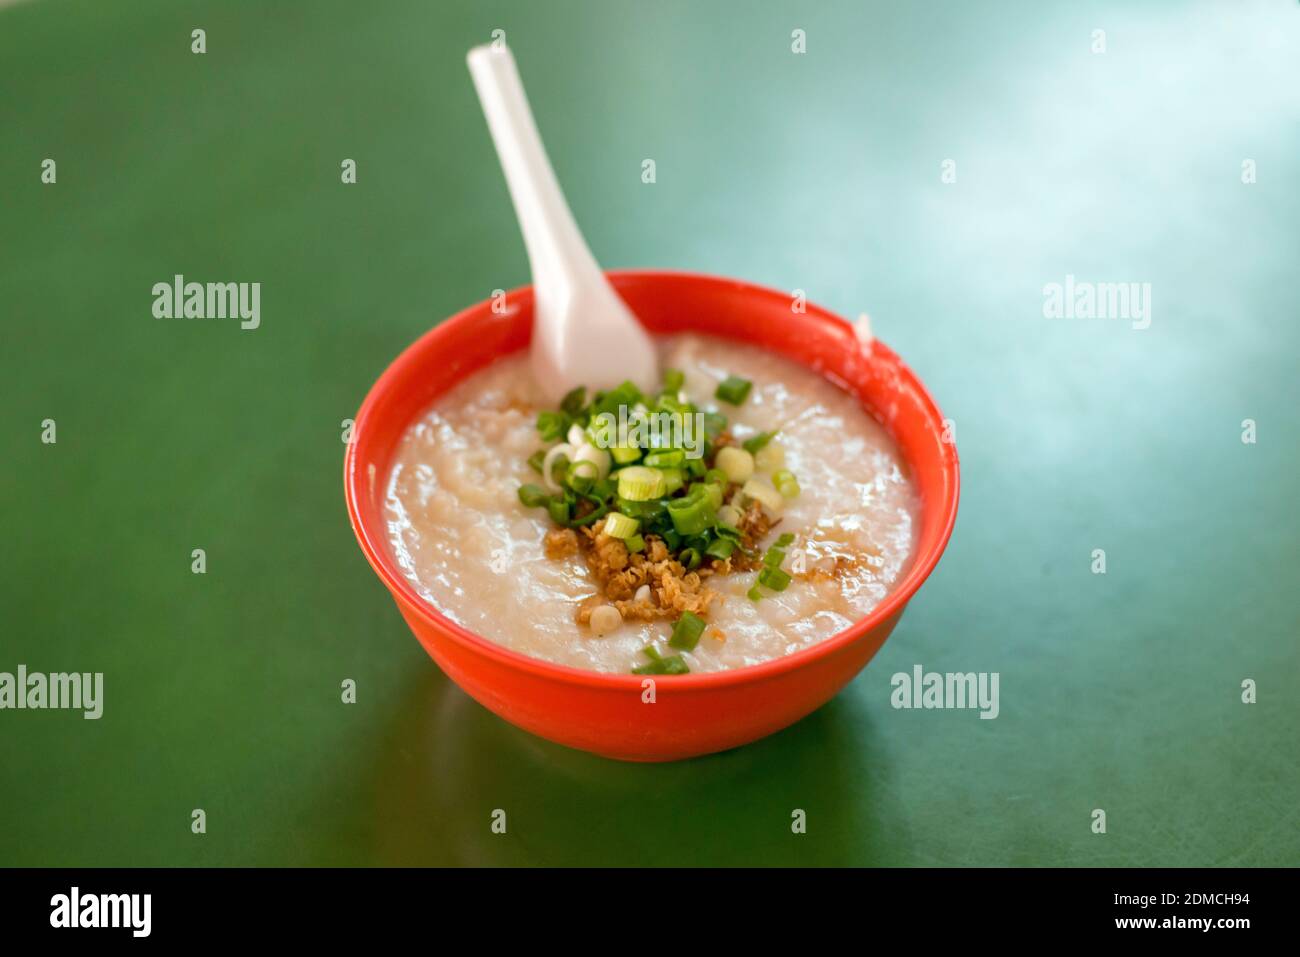 High Angle View Of Soup In Bowl On Table Stock Photo